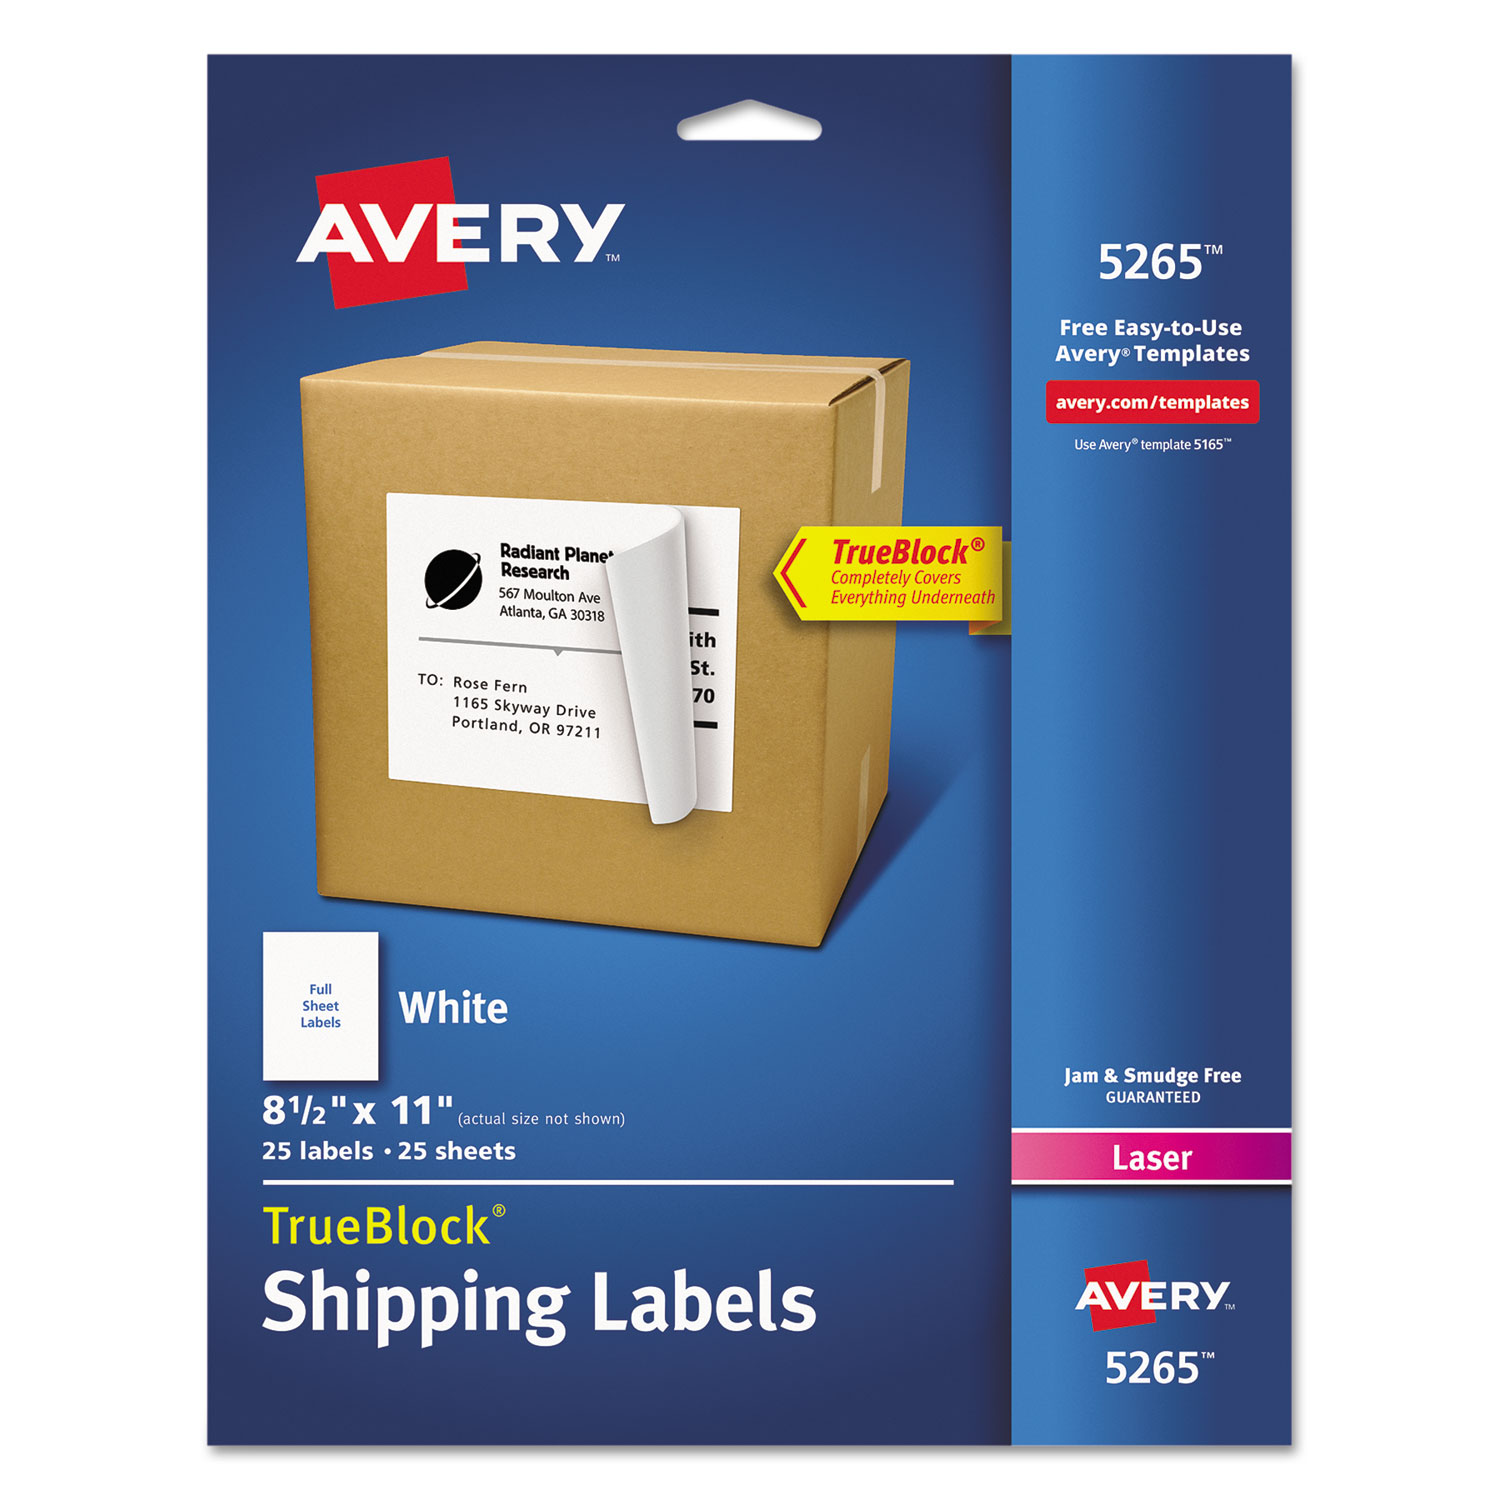  Avery 05265 Shipping Labels with TrueBlock Technology, Laser Printers, 8.5 x 11, White, 25/Pack (AVE5265) 